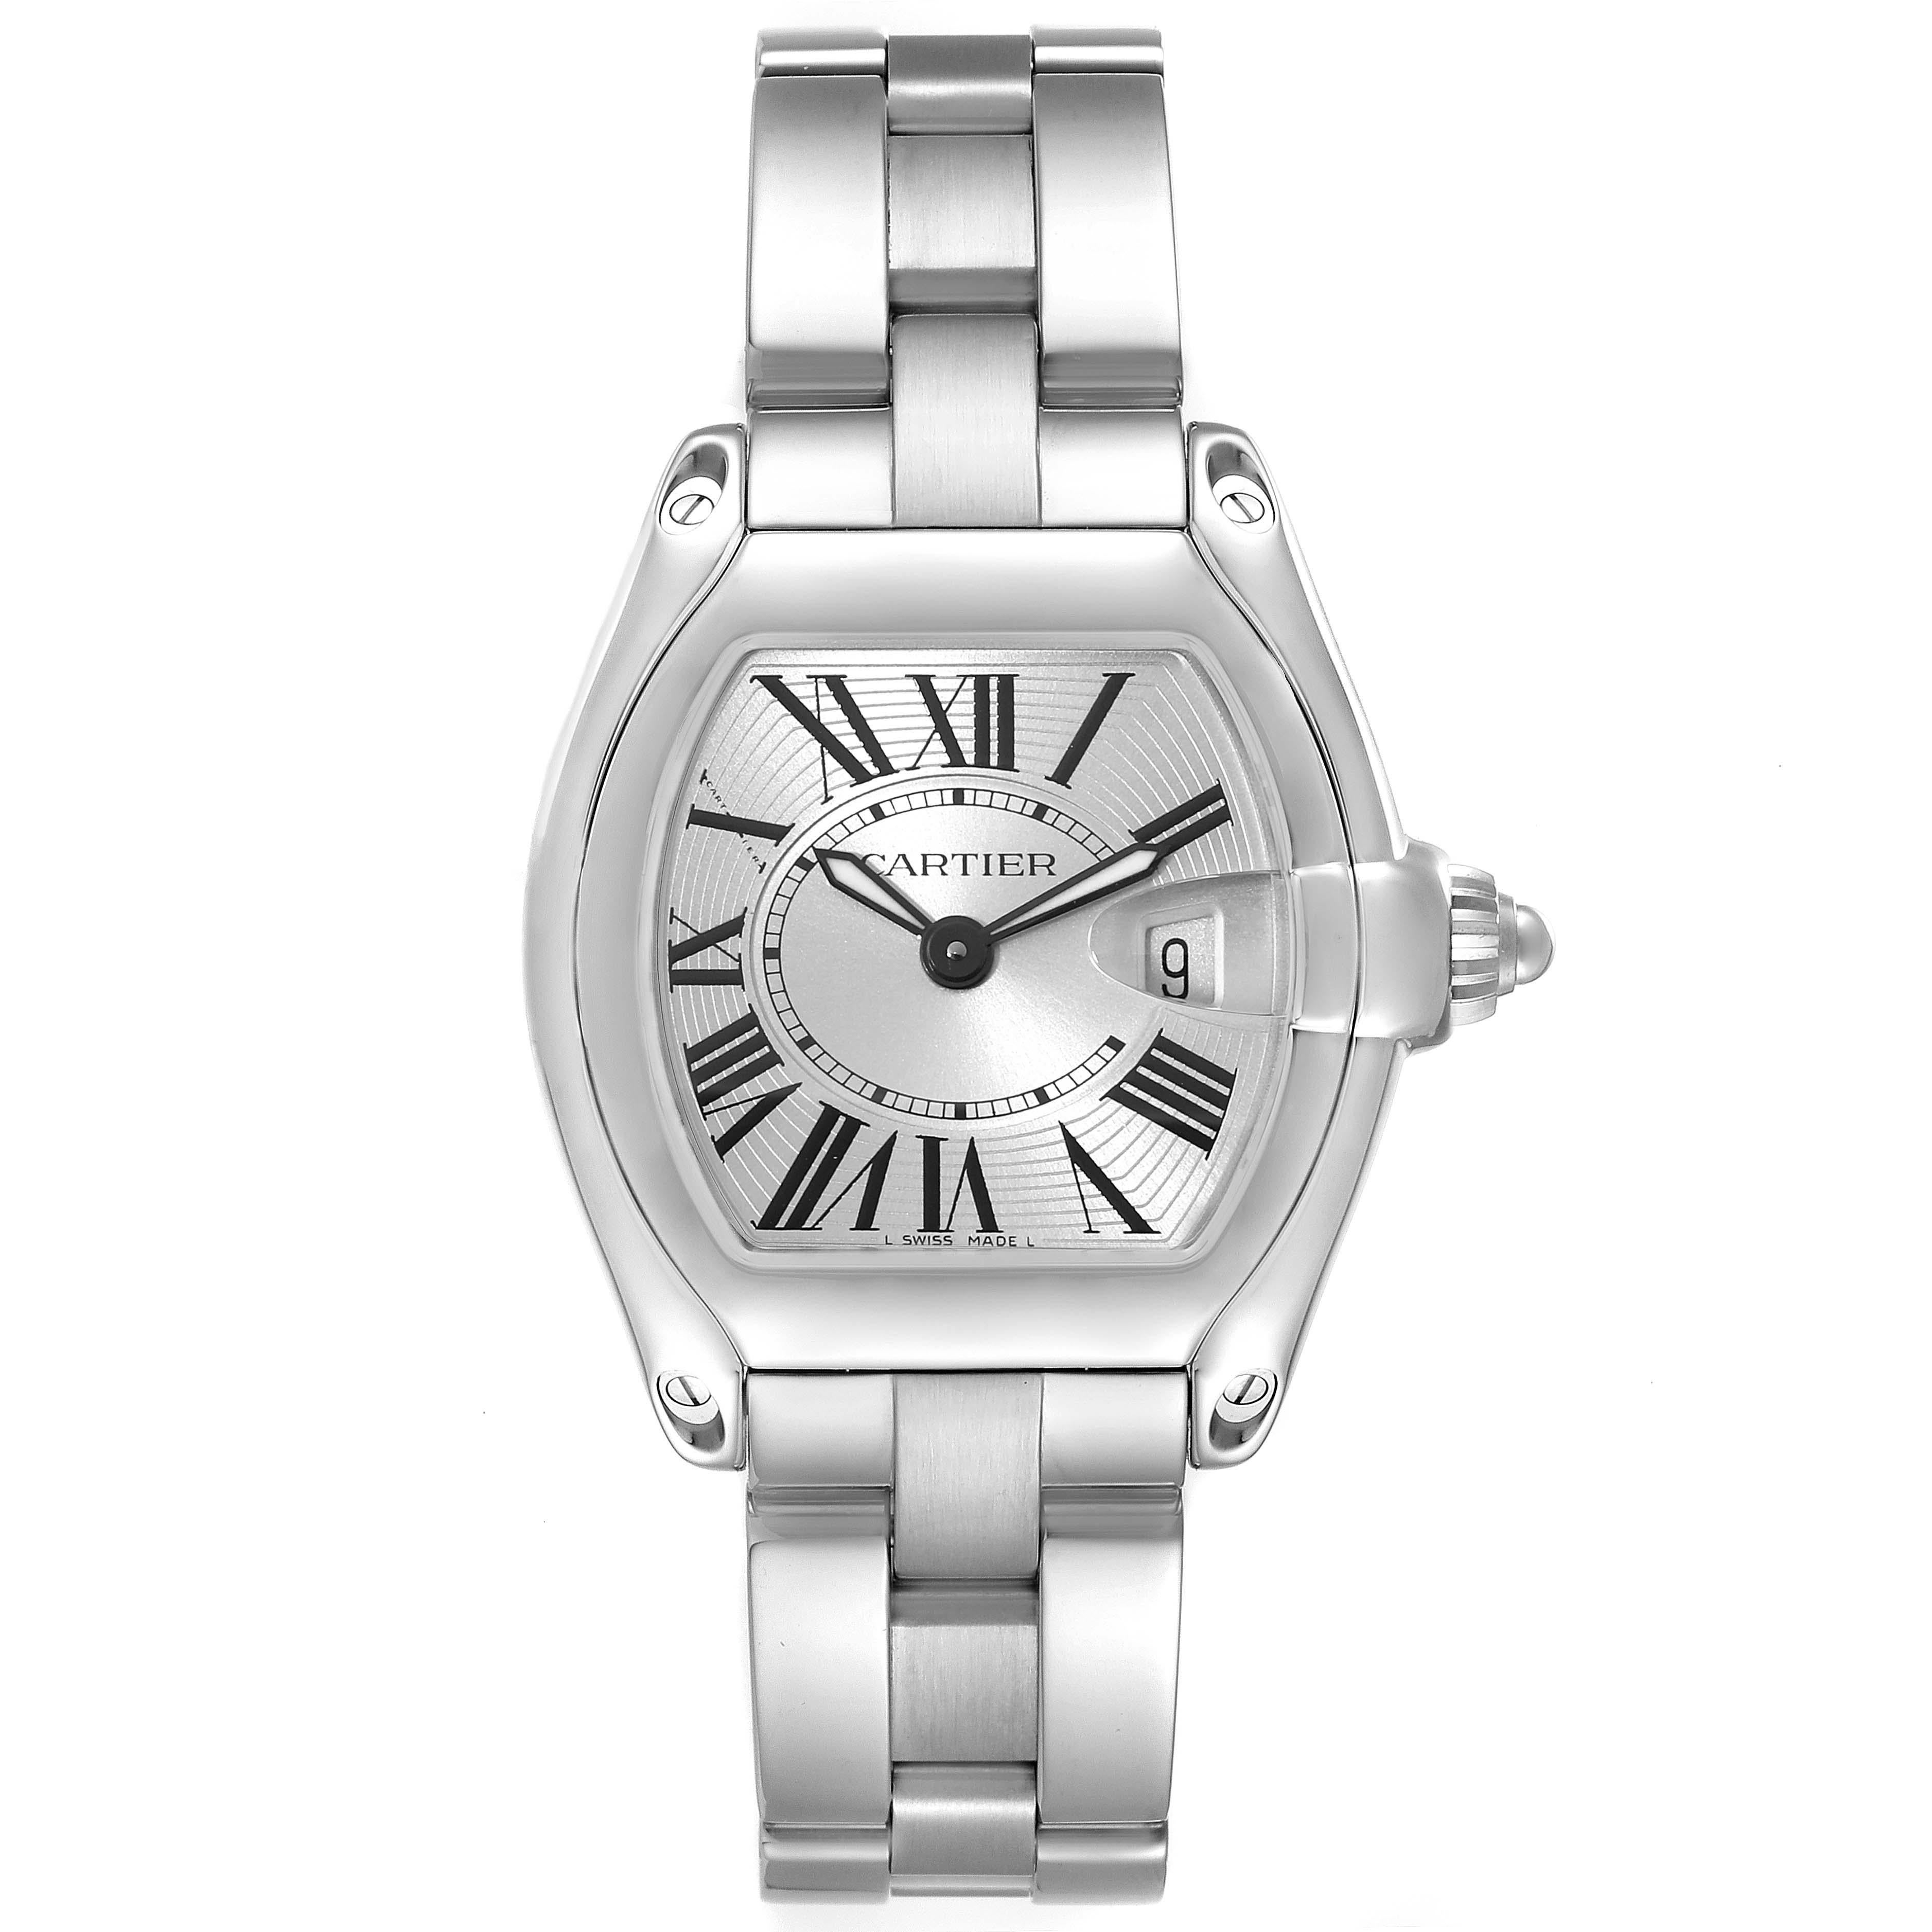 Cartier Roadster Small Silver Dial Steel Ladies Watch W62016V3 Papers. Swiss quartz movement caliber 688. Stainless steel tonneau shaped case 36 x 30 mm. . Scratch resistant sapphire crystal with cyclops magnifier. Silver sunray effect dial with